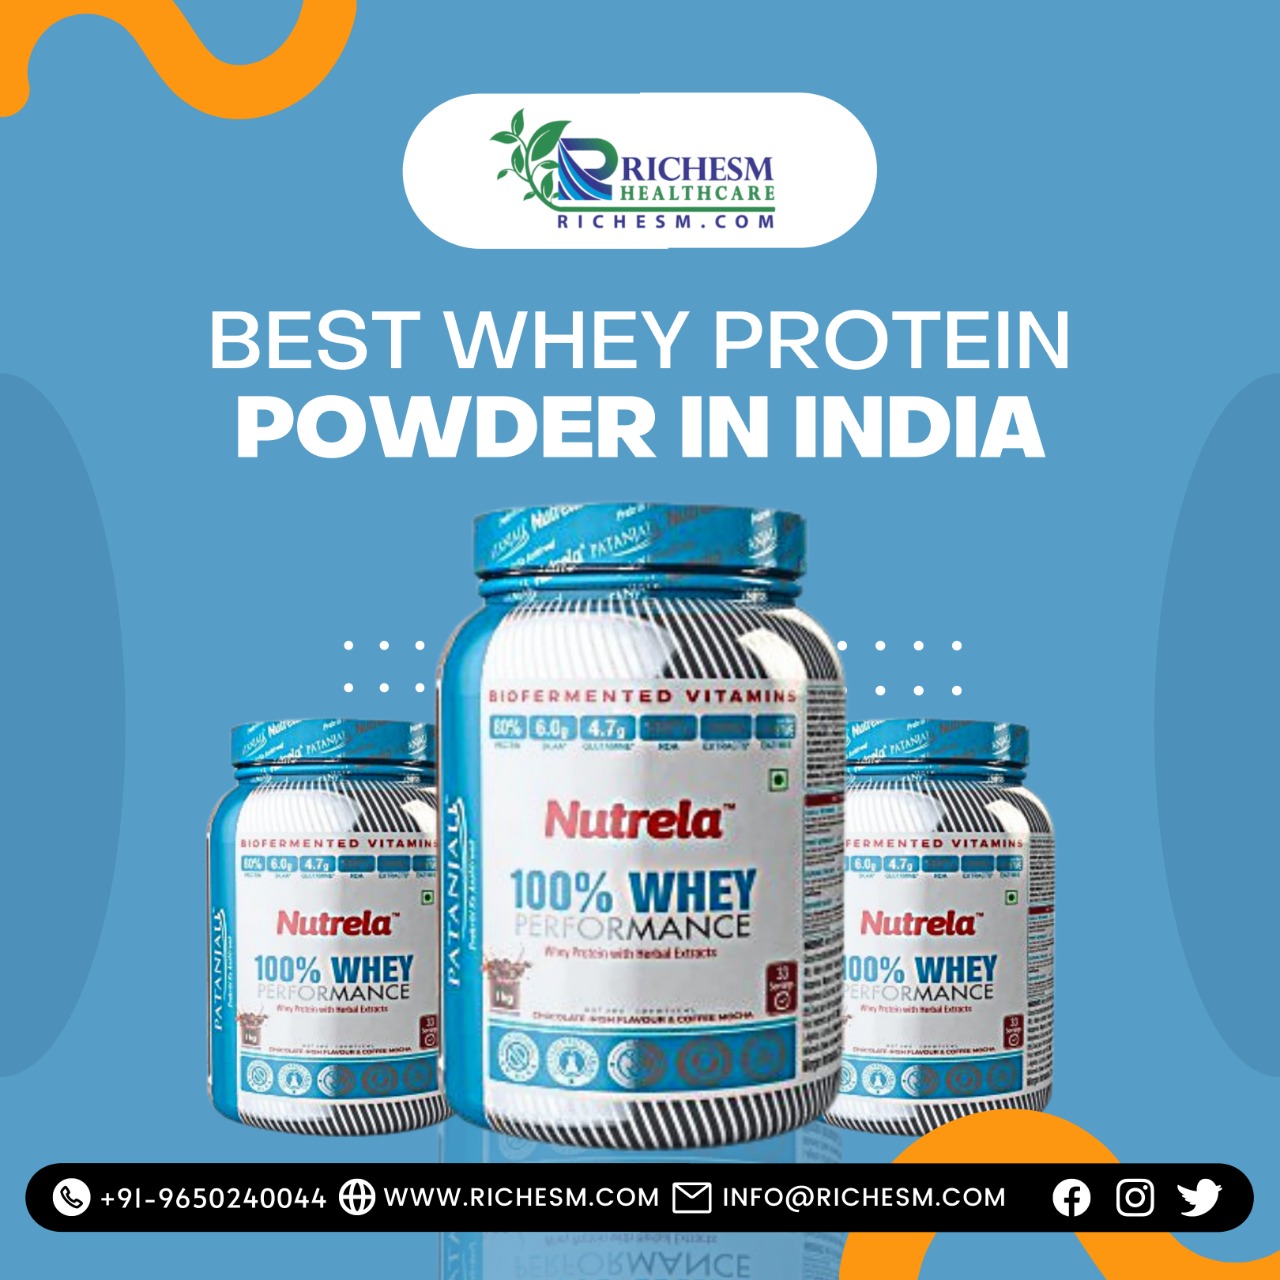 Best Whey Protein Powder Health and Nutrition best whey protein powder